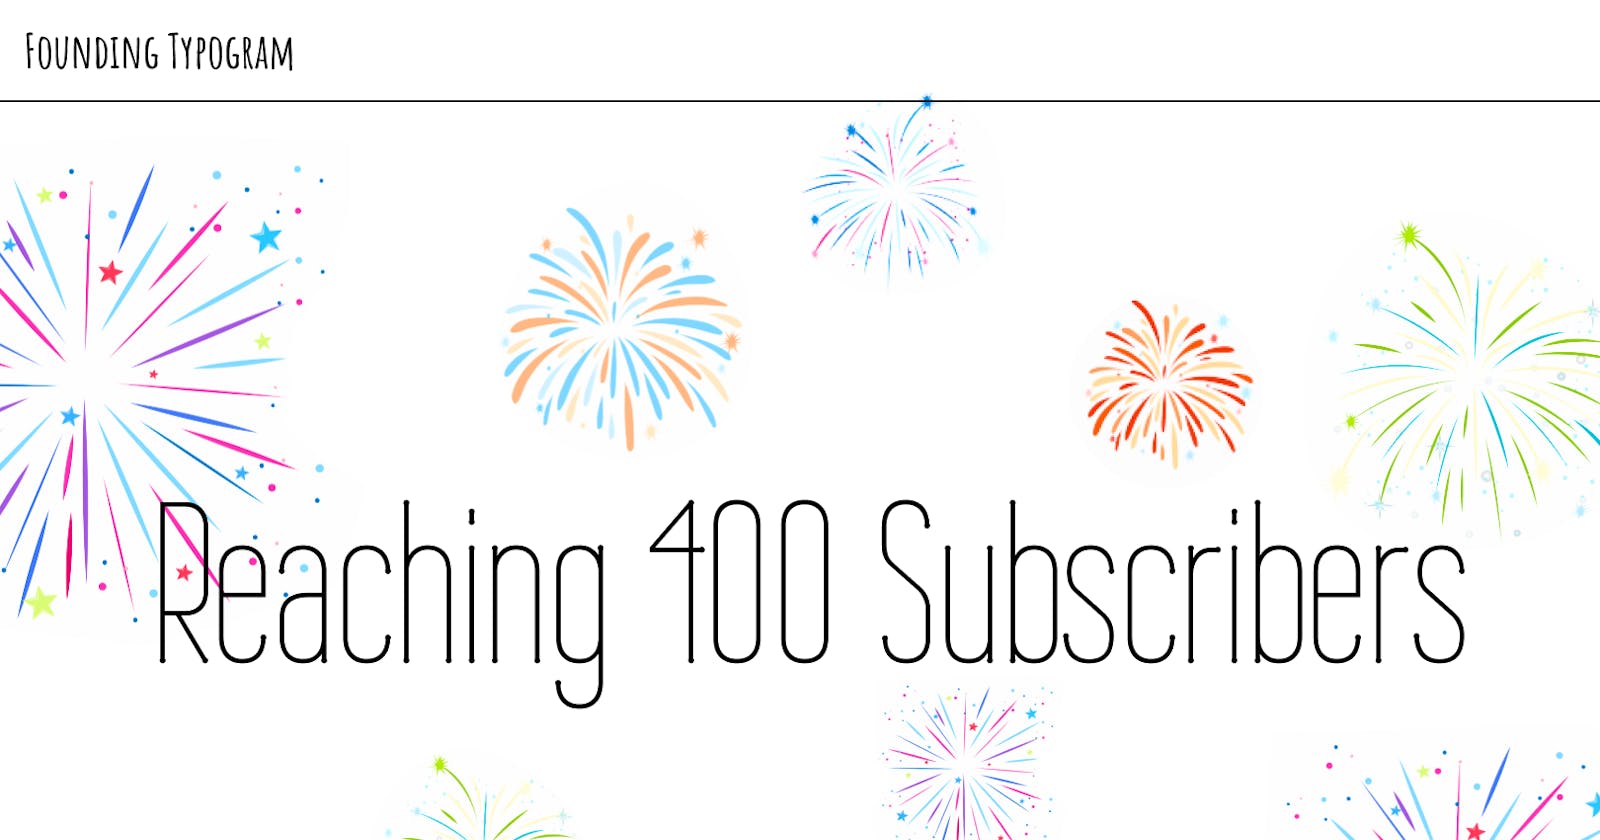 Finally Reaching 400 Subscribers on My Newsletter!